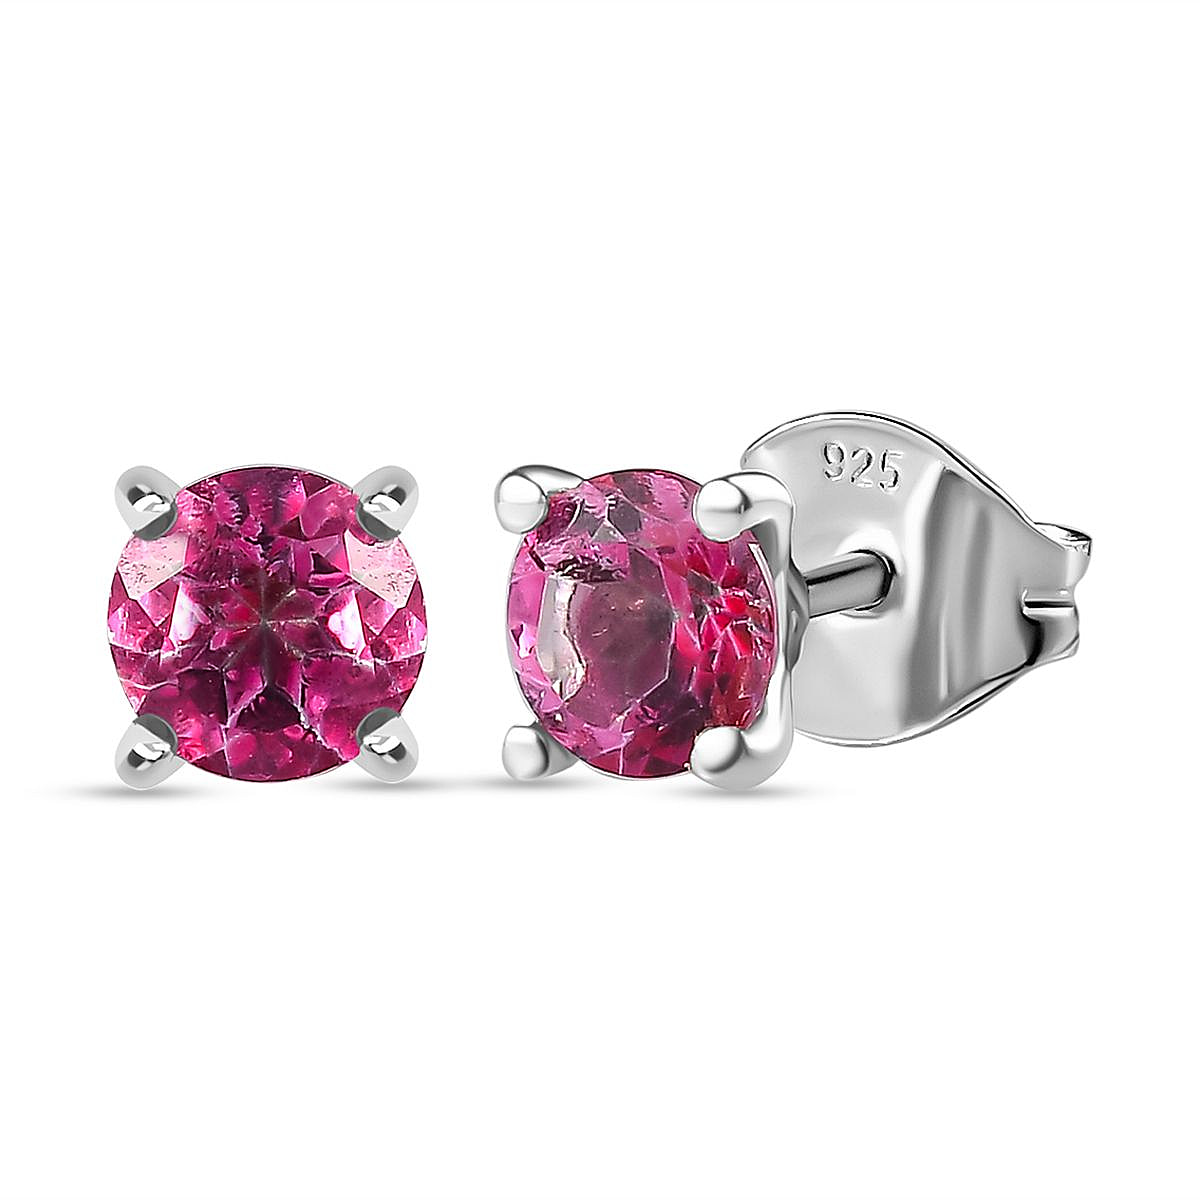 Pink Mystic Topaz Solitaire Stud Earrings in Platinum Overlay Sterling Silver 1.17 Ct.